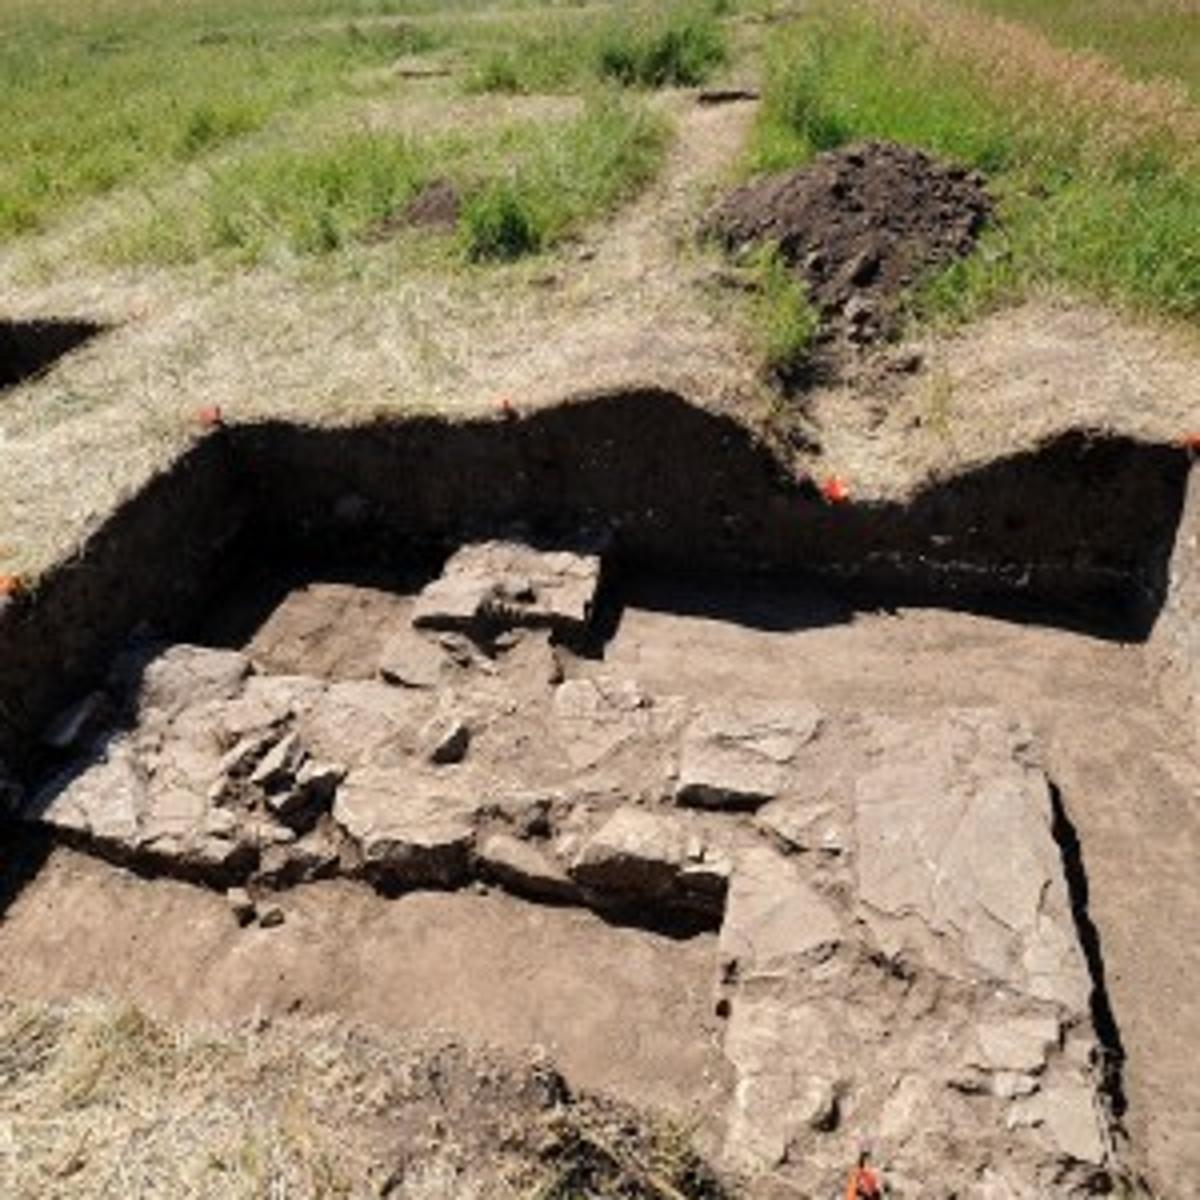 Agency Archaeology Dig Near Absarokee Reveals Crow History